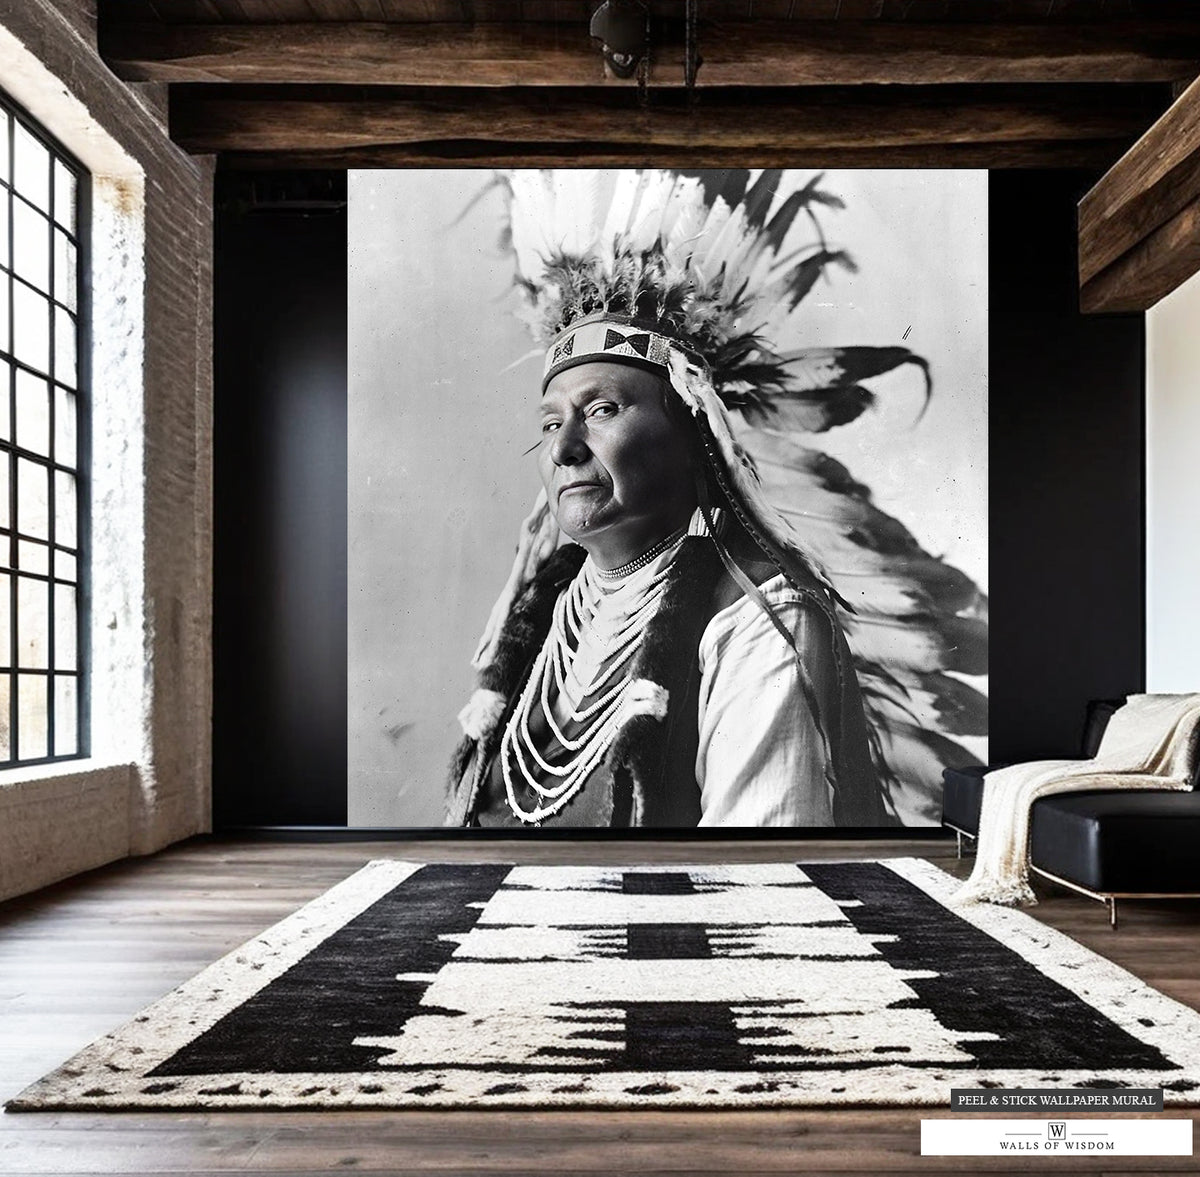 Large wall art featuring Chief Joseph, iconic Native American leader.